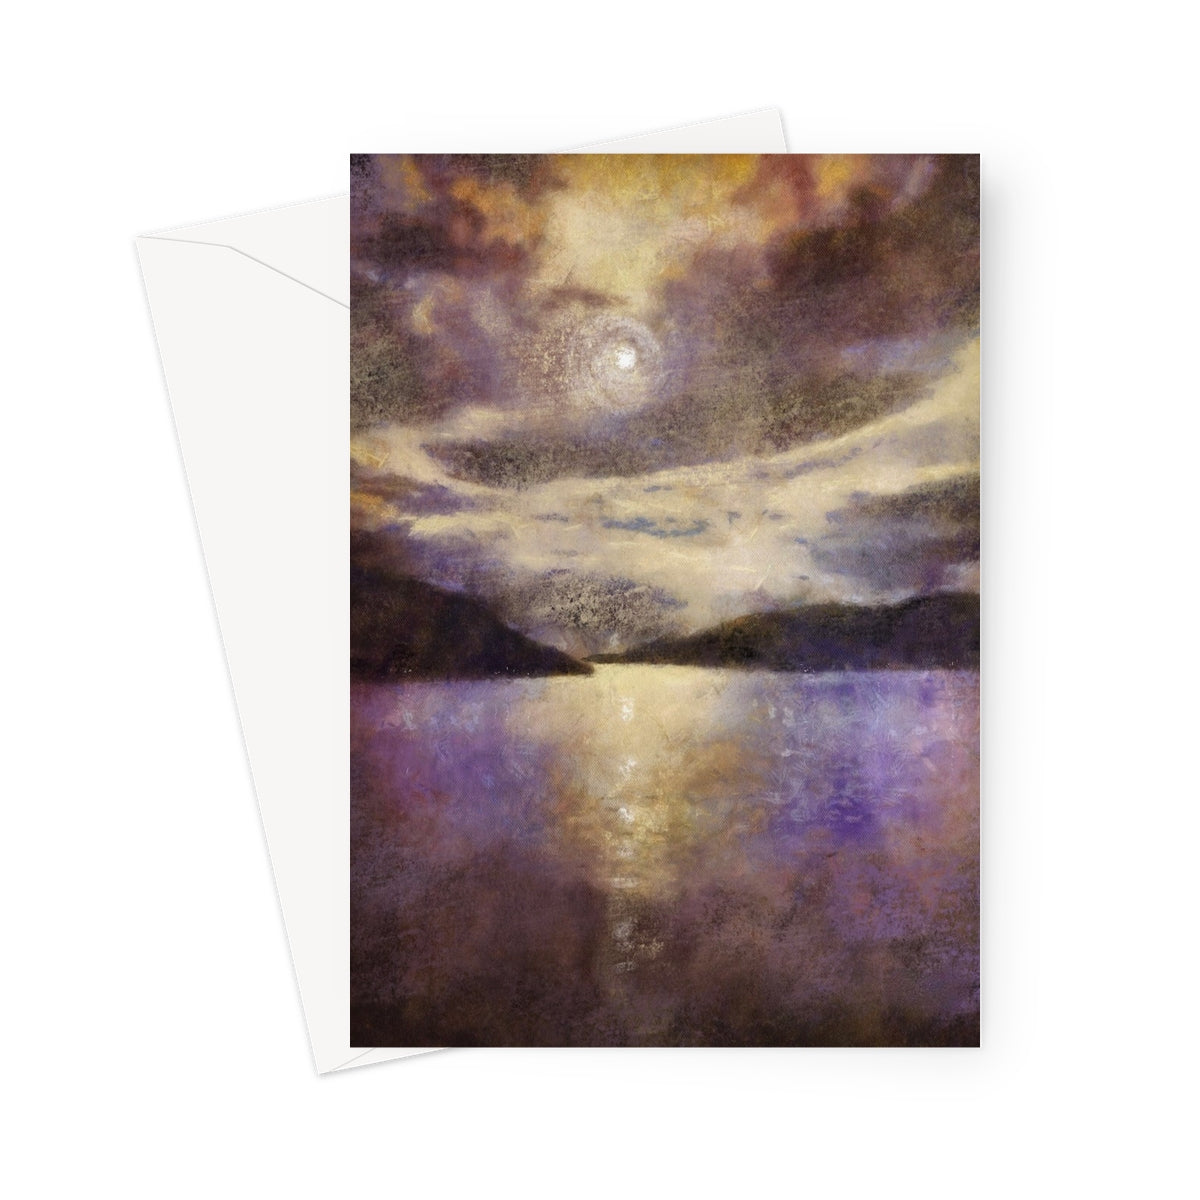 Moonlight Meets Lewis & Harris Art Gifts Greeting Card-Greetings Cards-Hebridean Islands Art Gallery-5"x7"-10 Cards-Paintings, Prints, Homeware, Art Gifts From Scotland By Scottish Artist Kevin Hunter